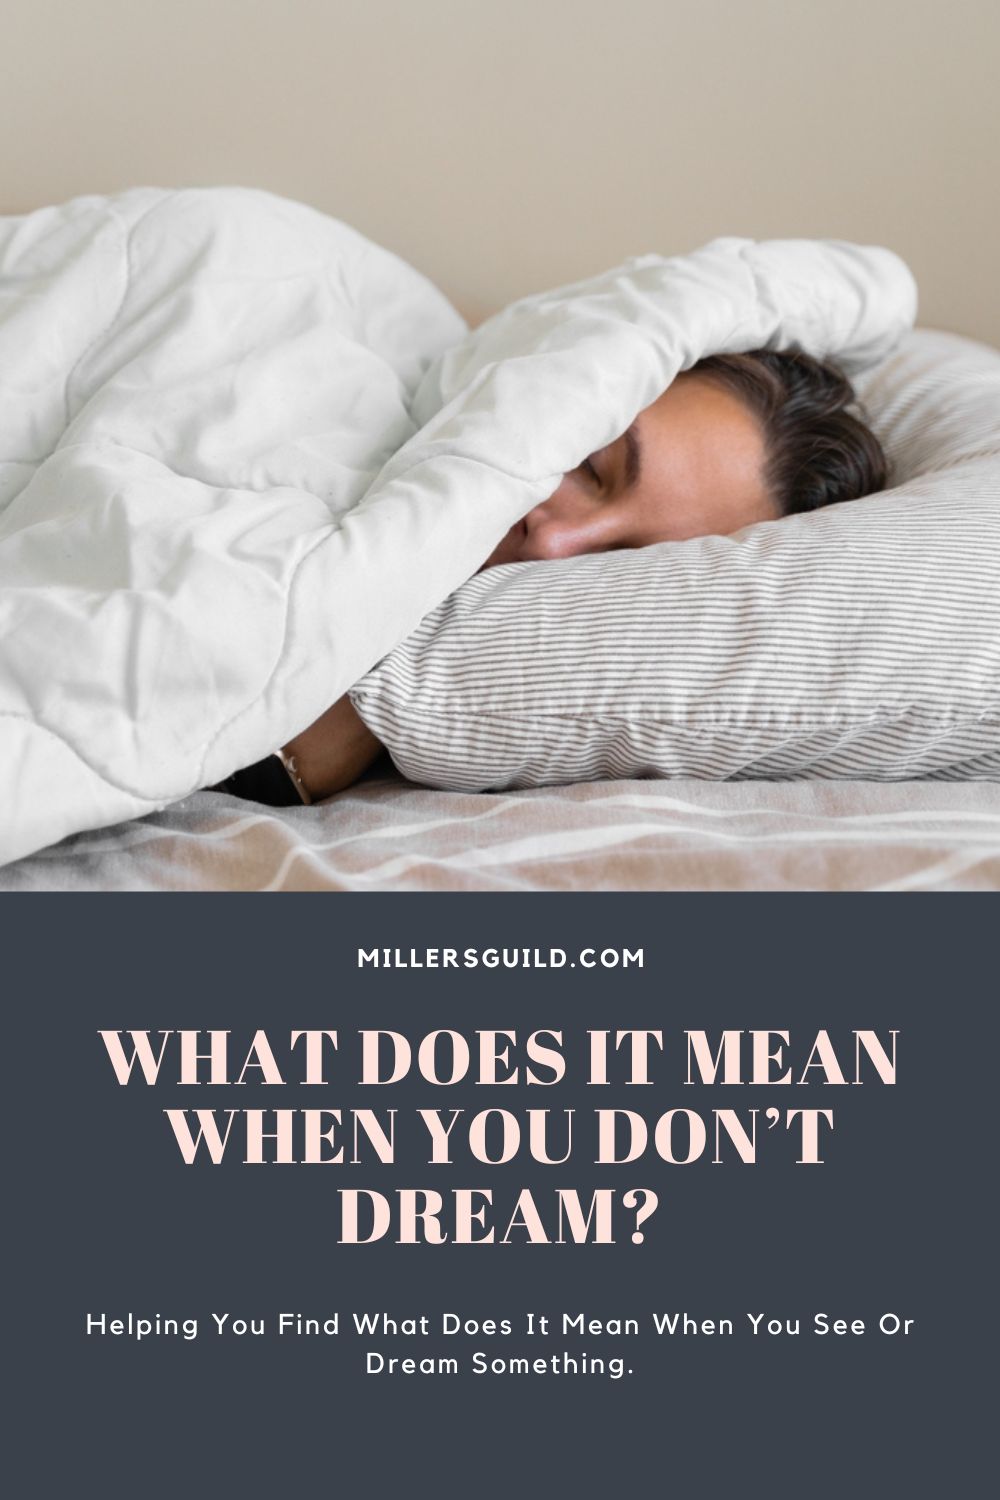 What Does It Mean When You Don’t Dream